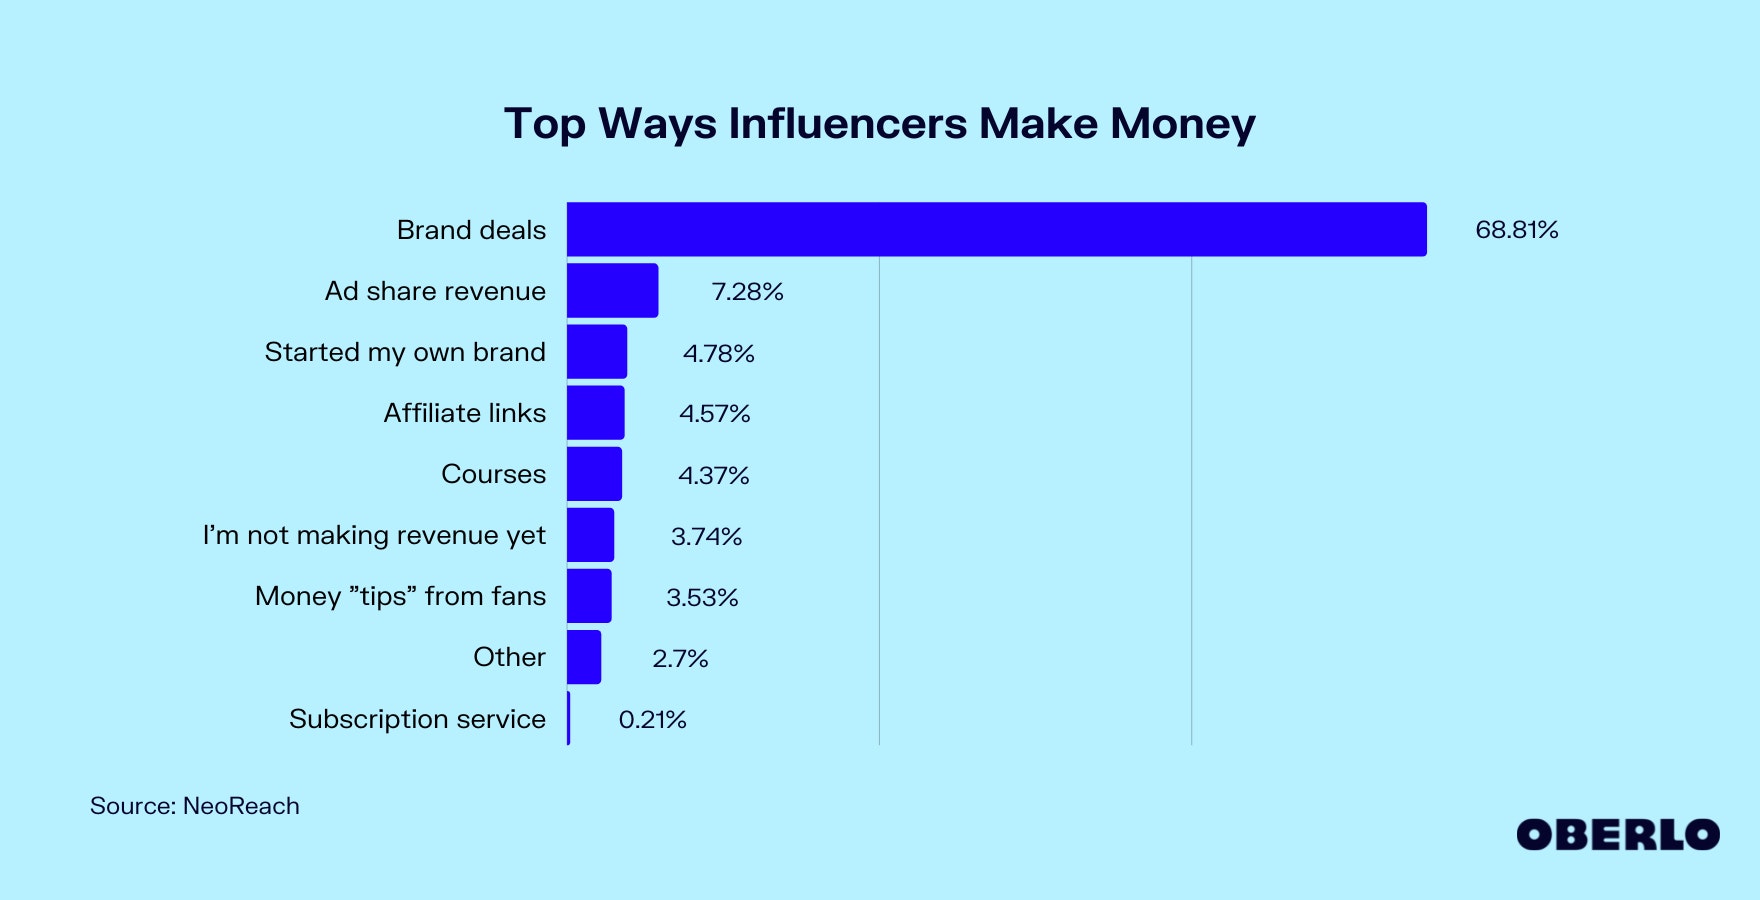 Chart showing the Top Ways Influencers Make Money